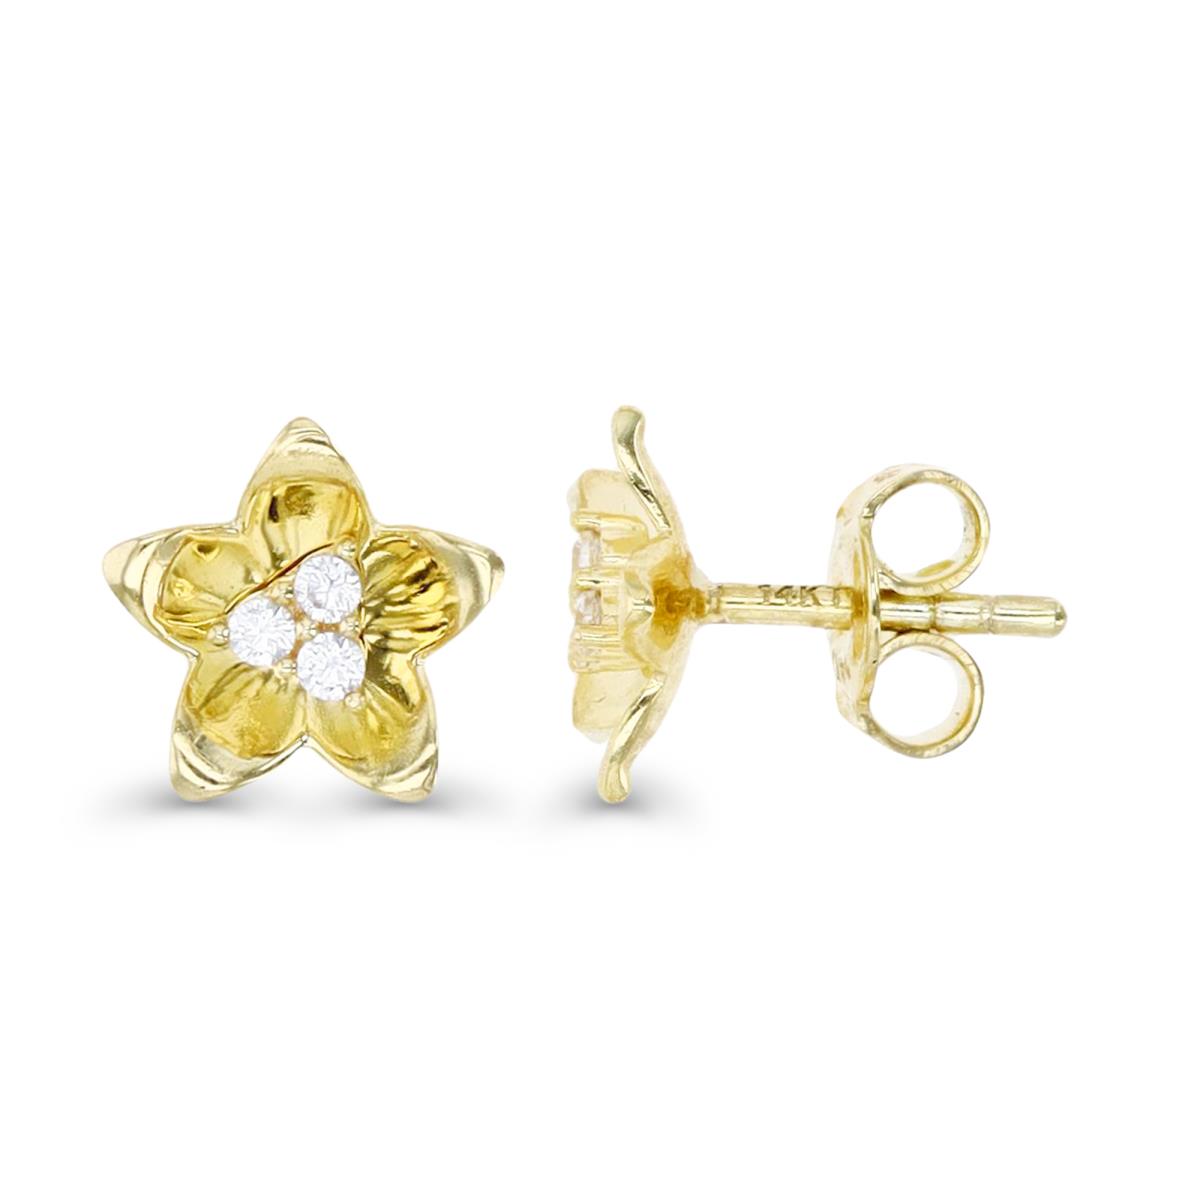 14K Gold Yellow 8.5MM Polished White CZ Flower Stud Earring